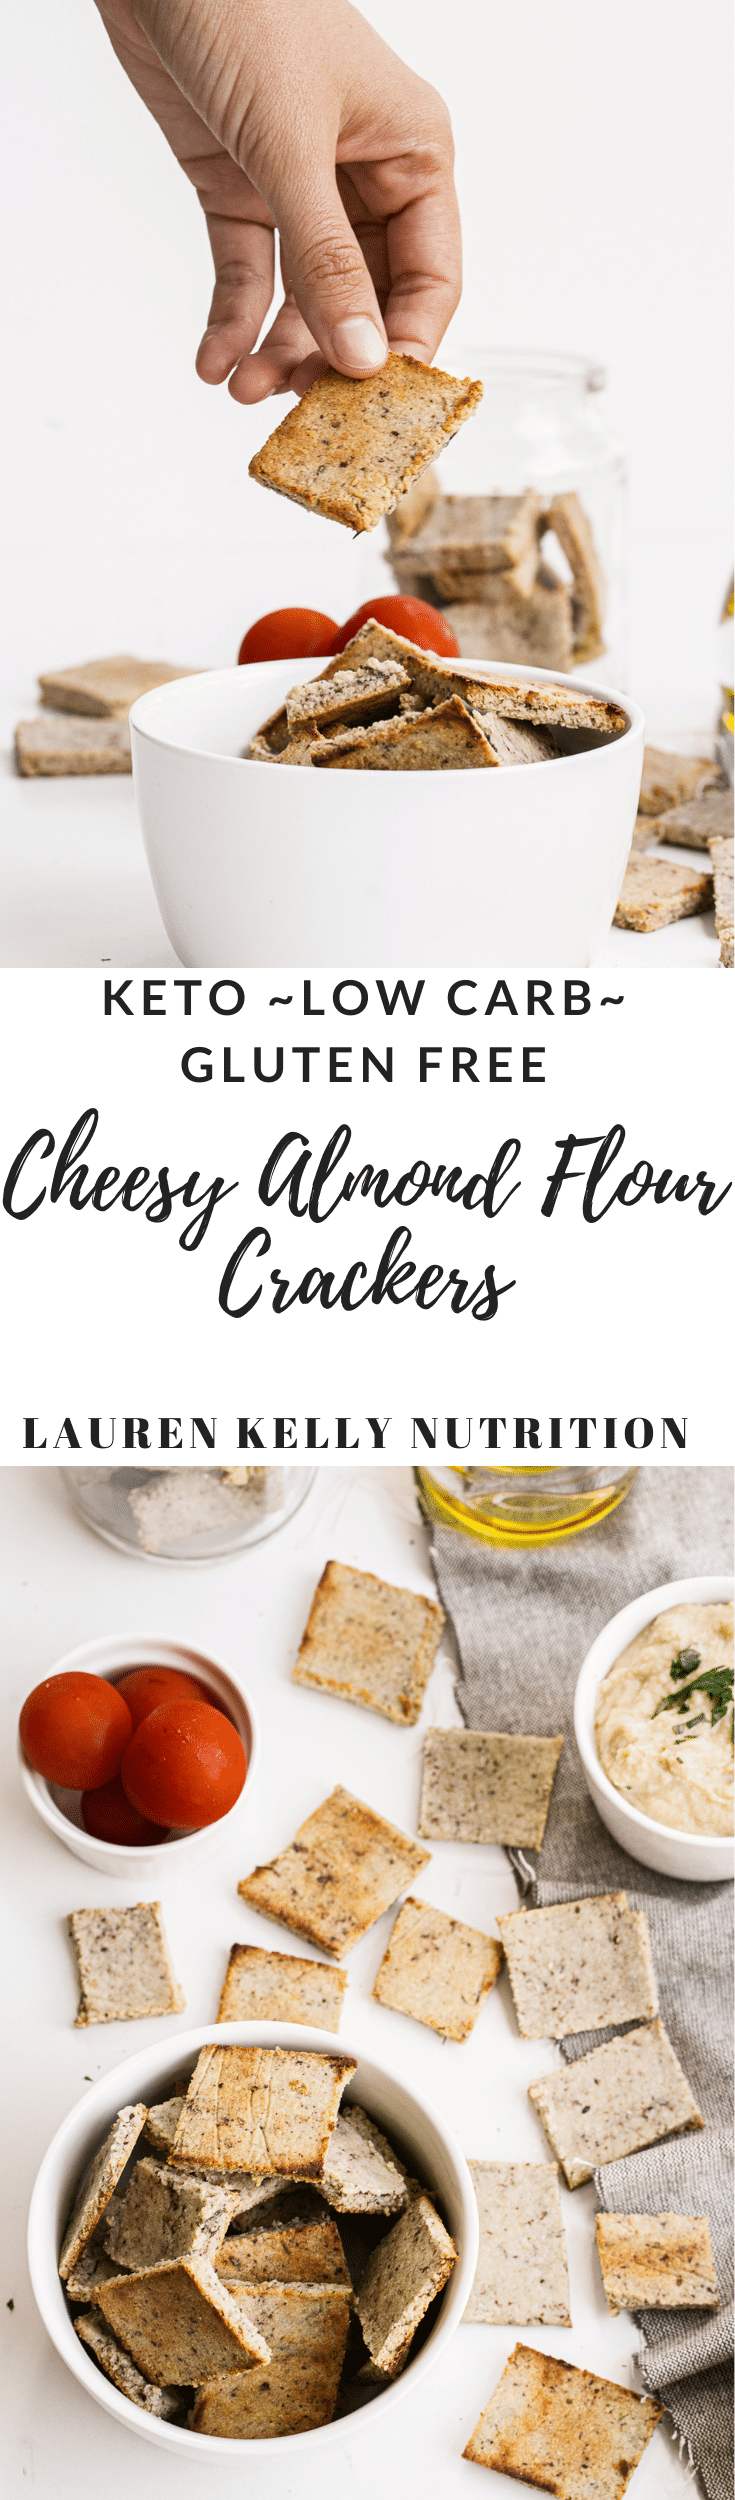 Simple to make, light and crunchy, these Cheesy Almond Flour Crackers make the perfect low carb snack!